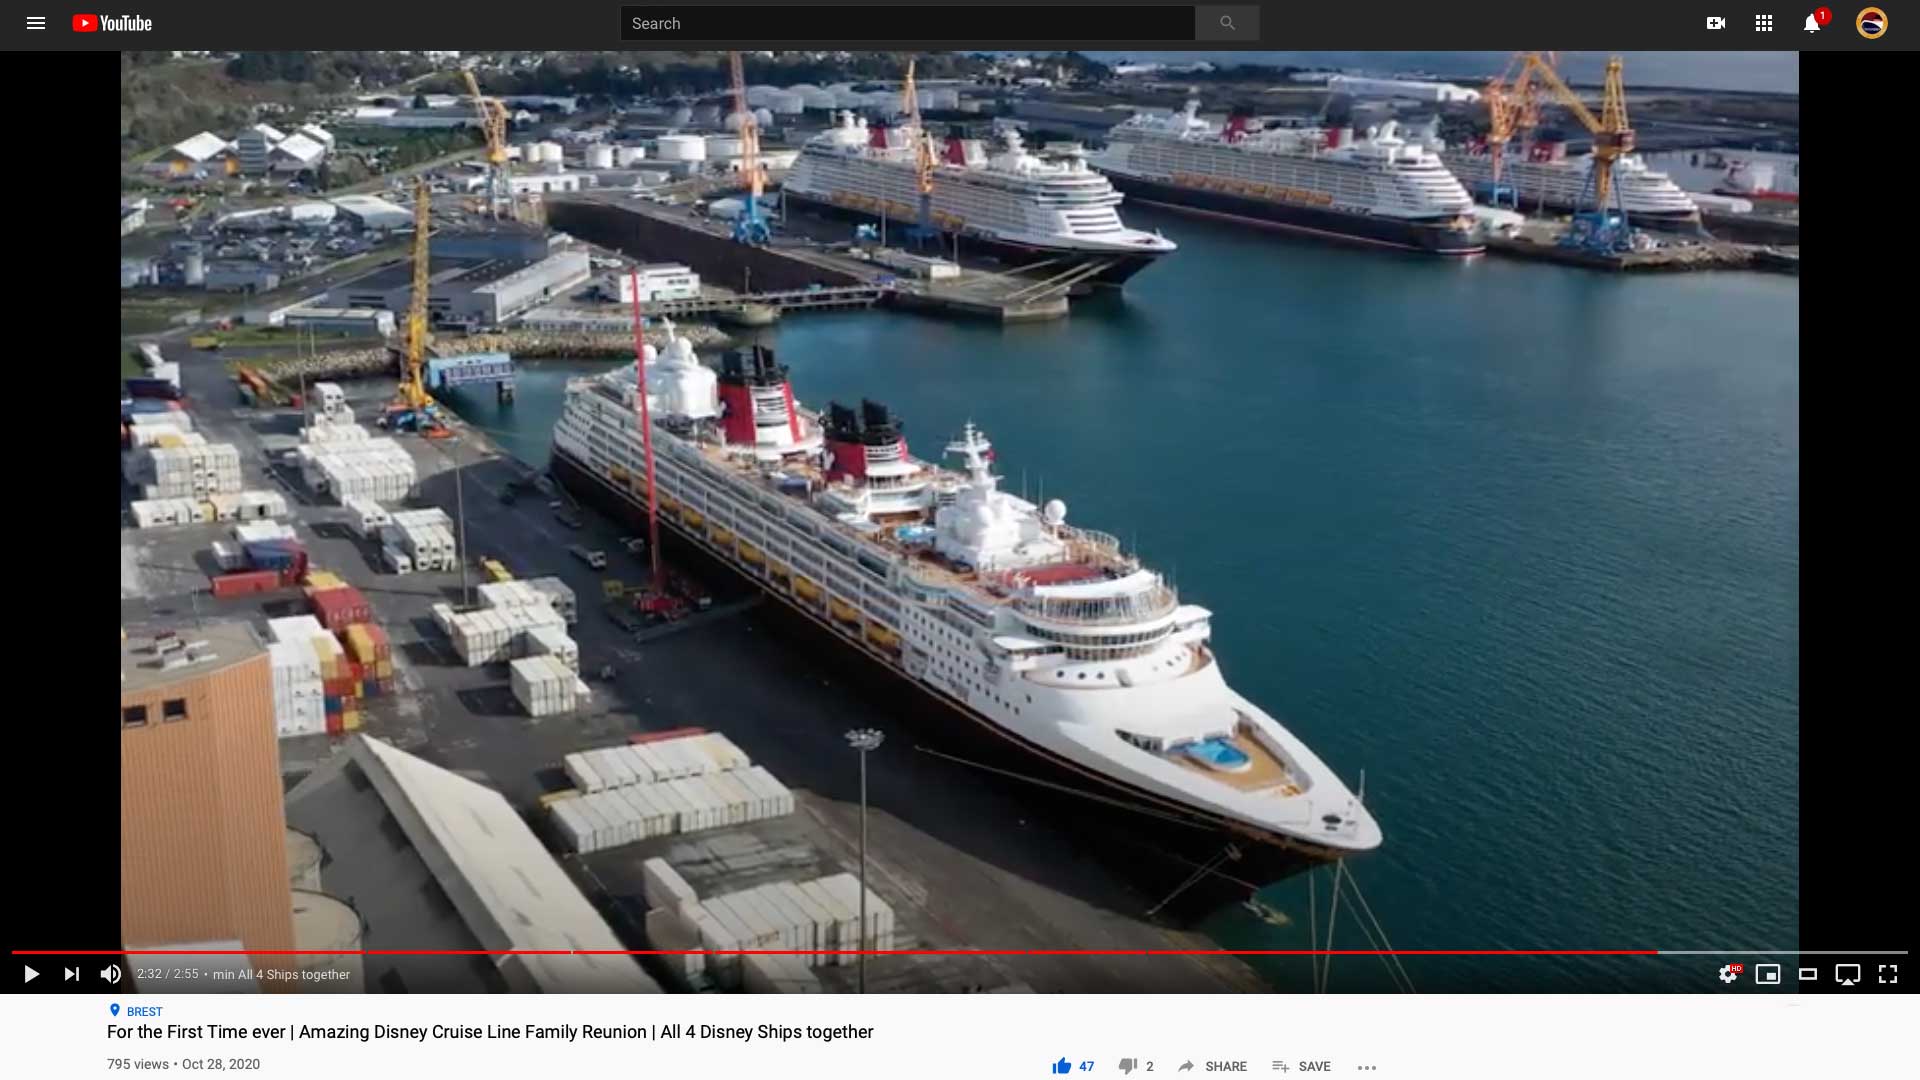 Enjoy the Disney Cruise Line video in French!